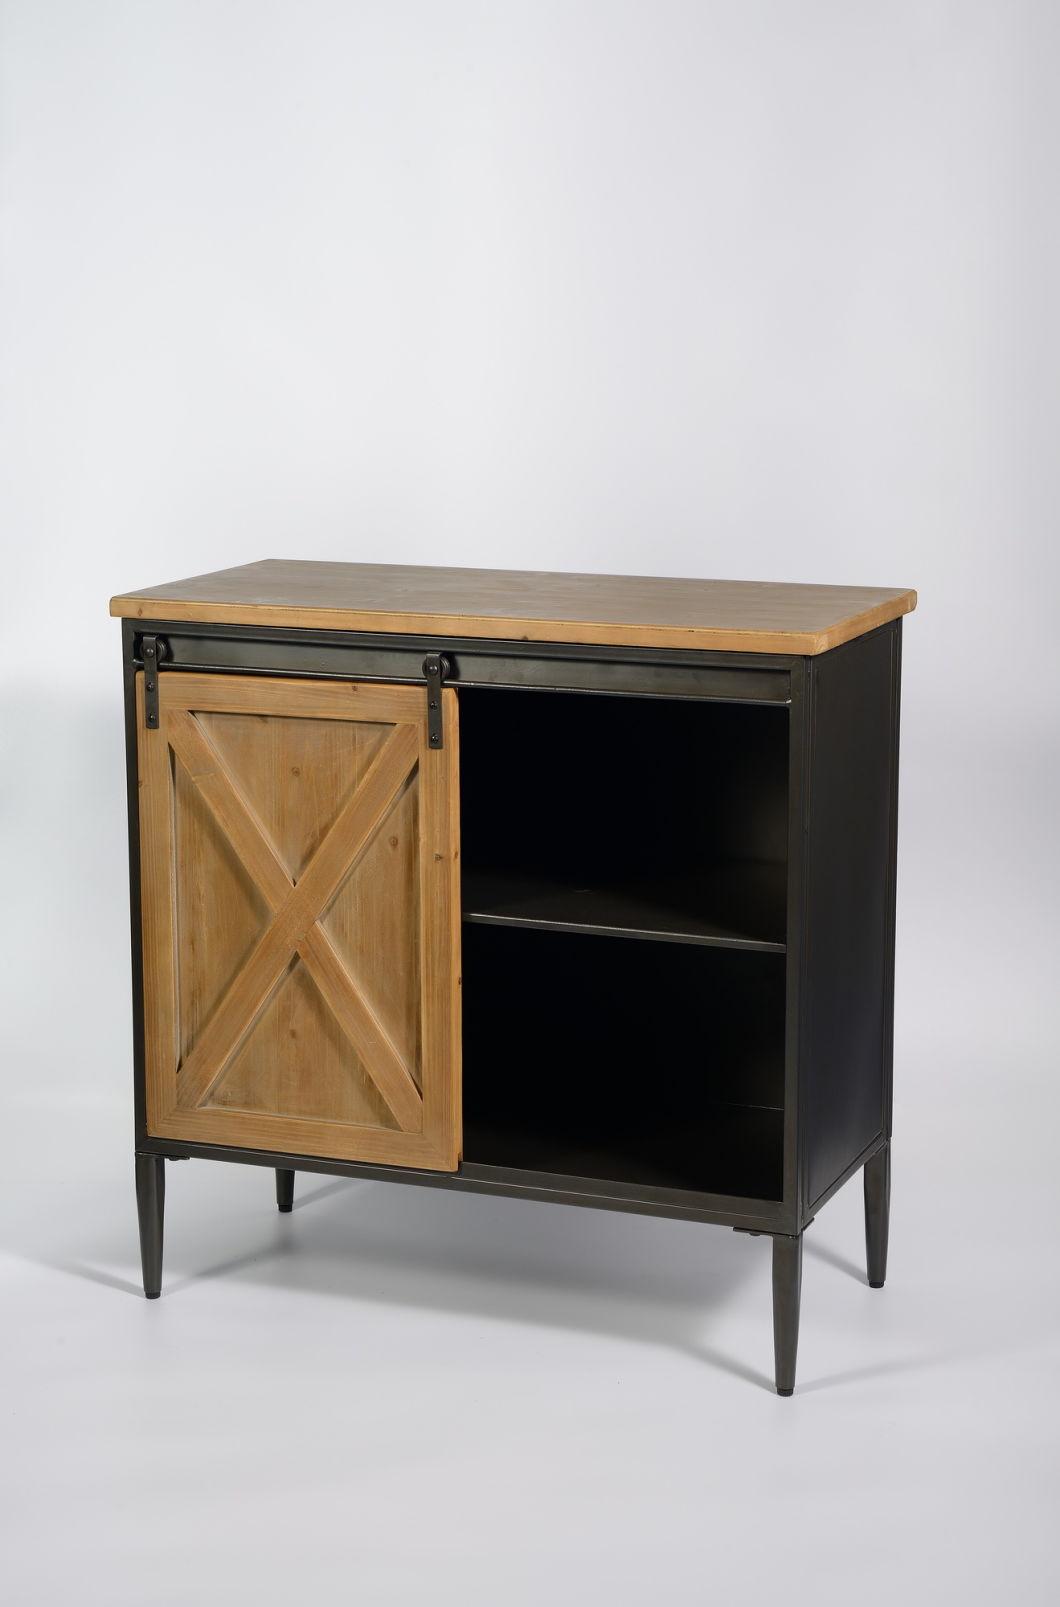 Supplying Home Furniture for Living Room Cabinets Made of Wood and Metal